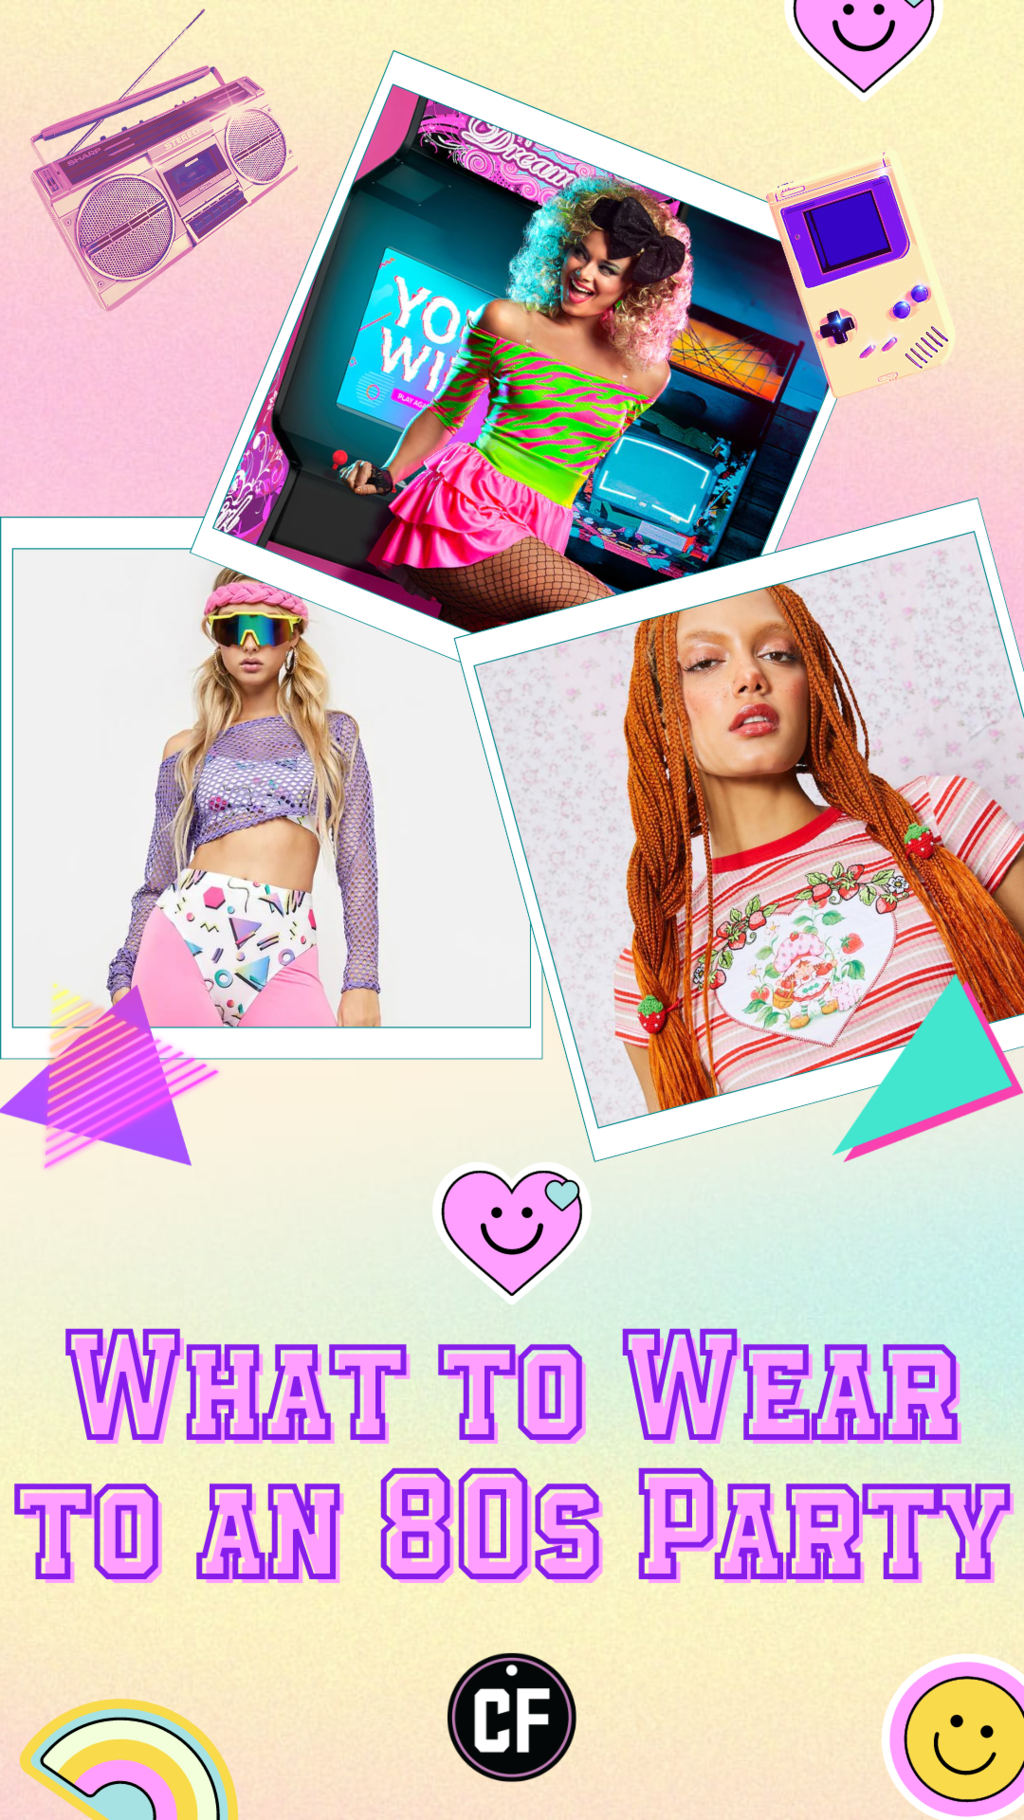 What to wear to an '80s party header image with three cute 80s outfits for ladies